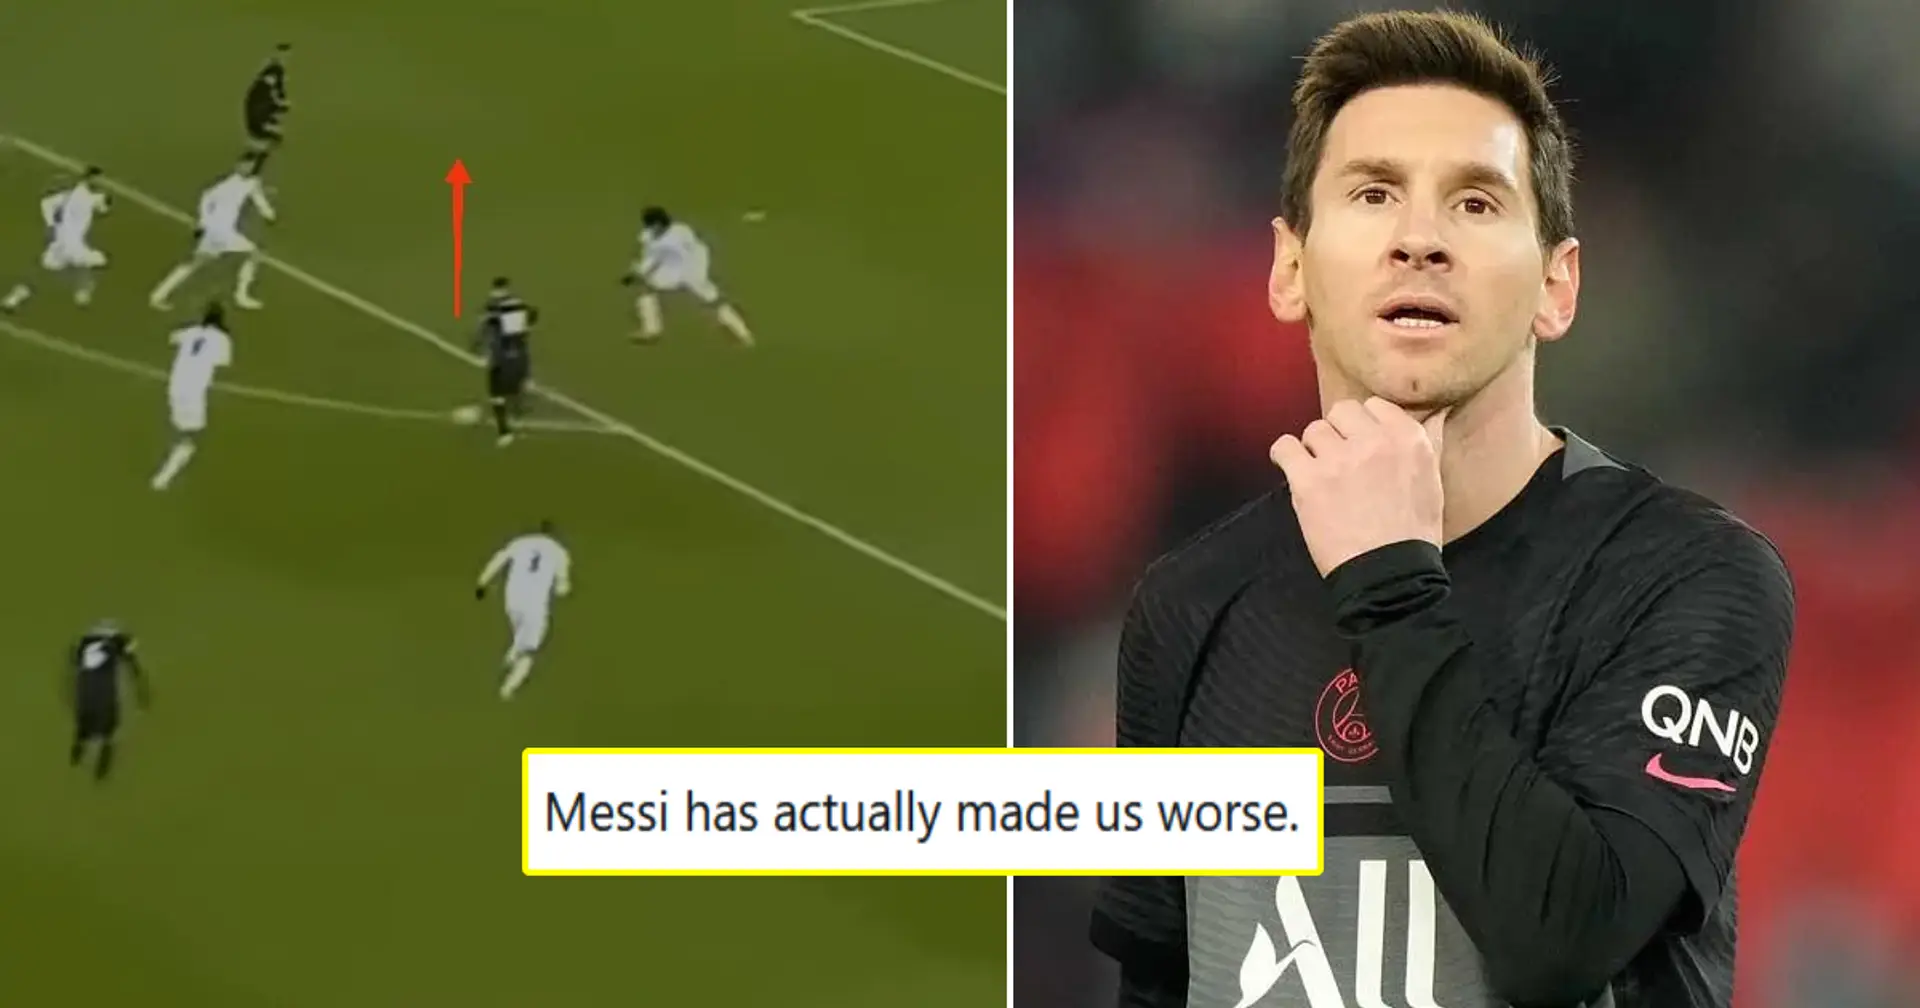 'Should have signed Ronaldo': PSG fans rip into Messi after cup defeat